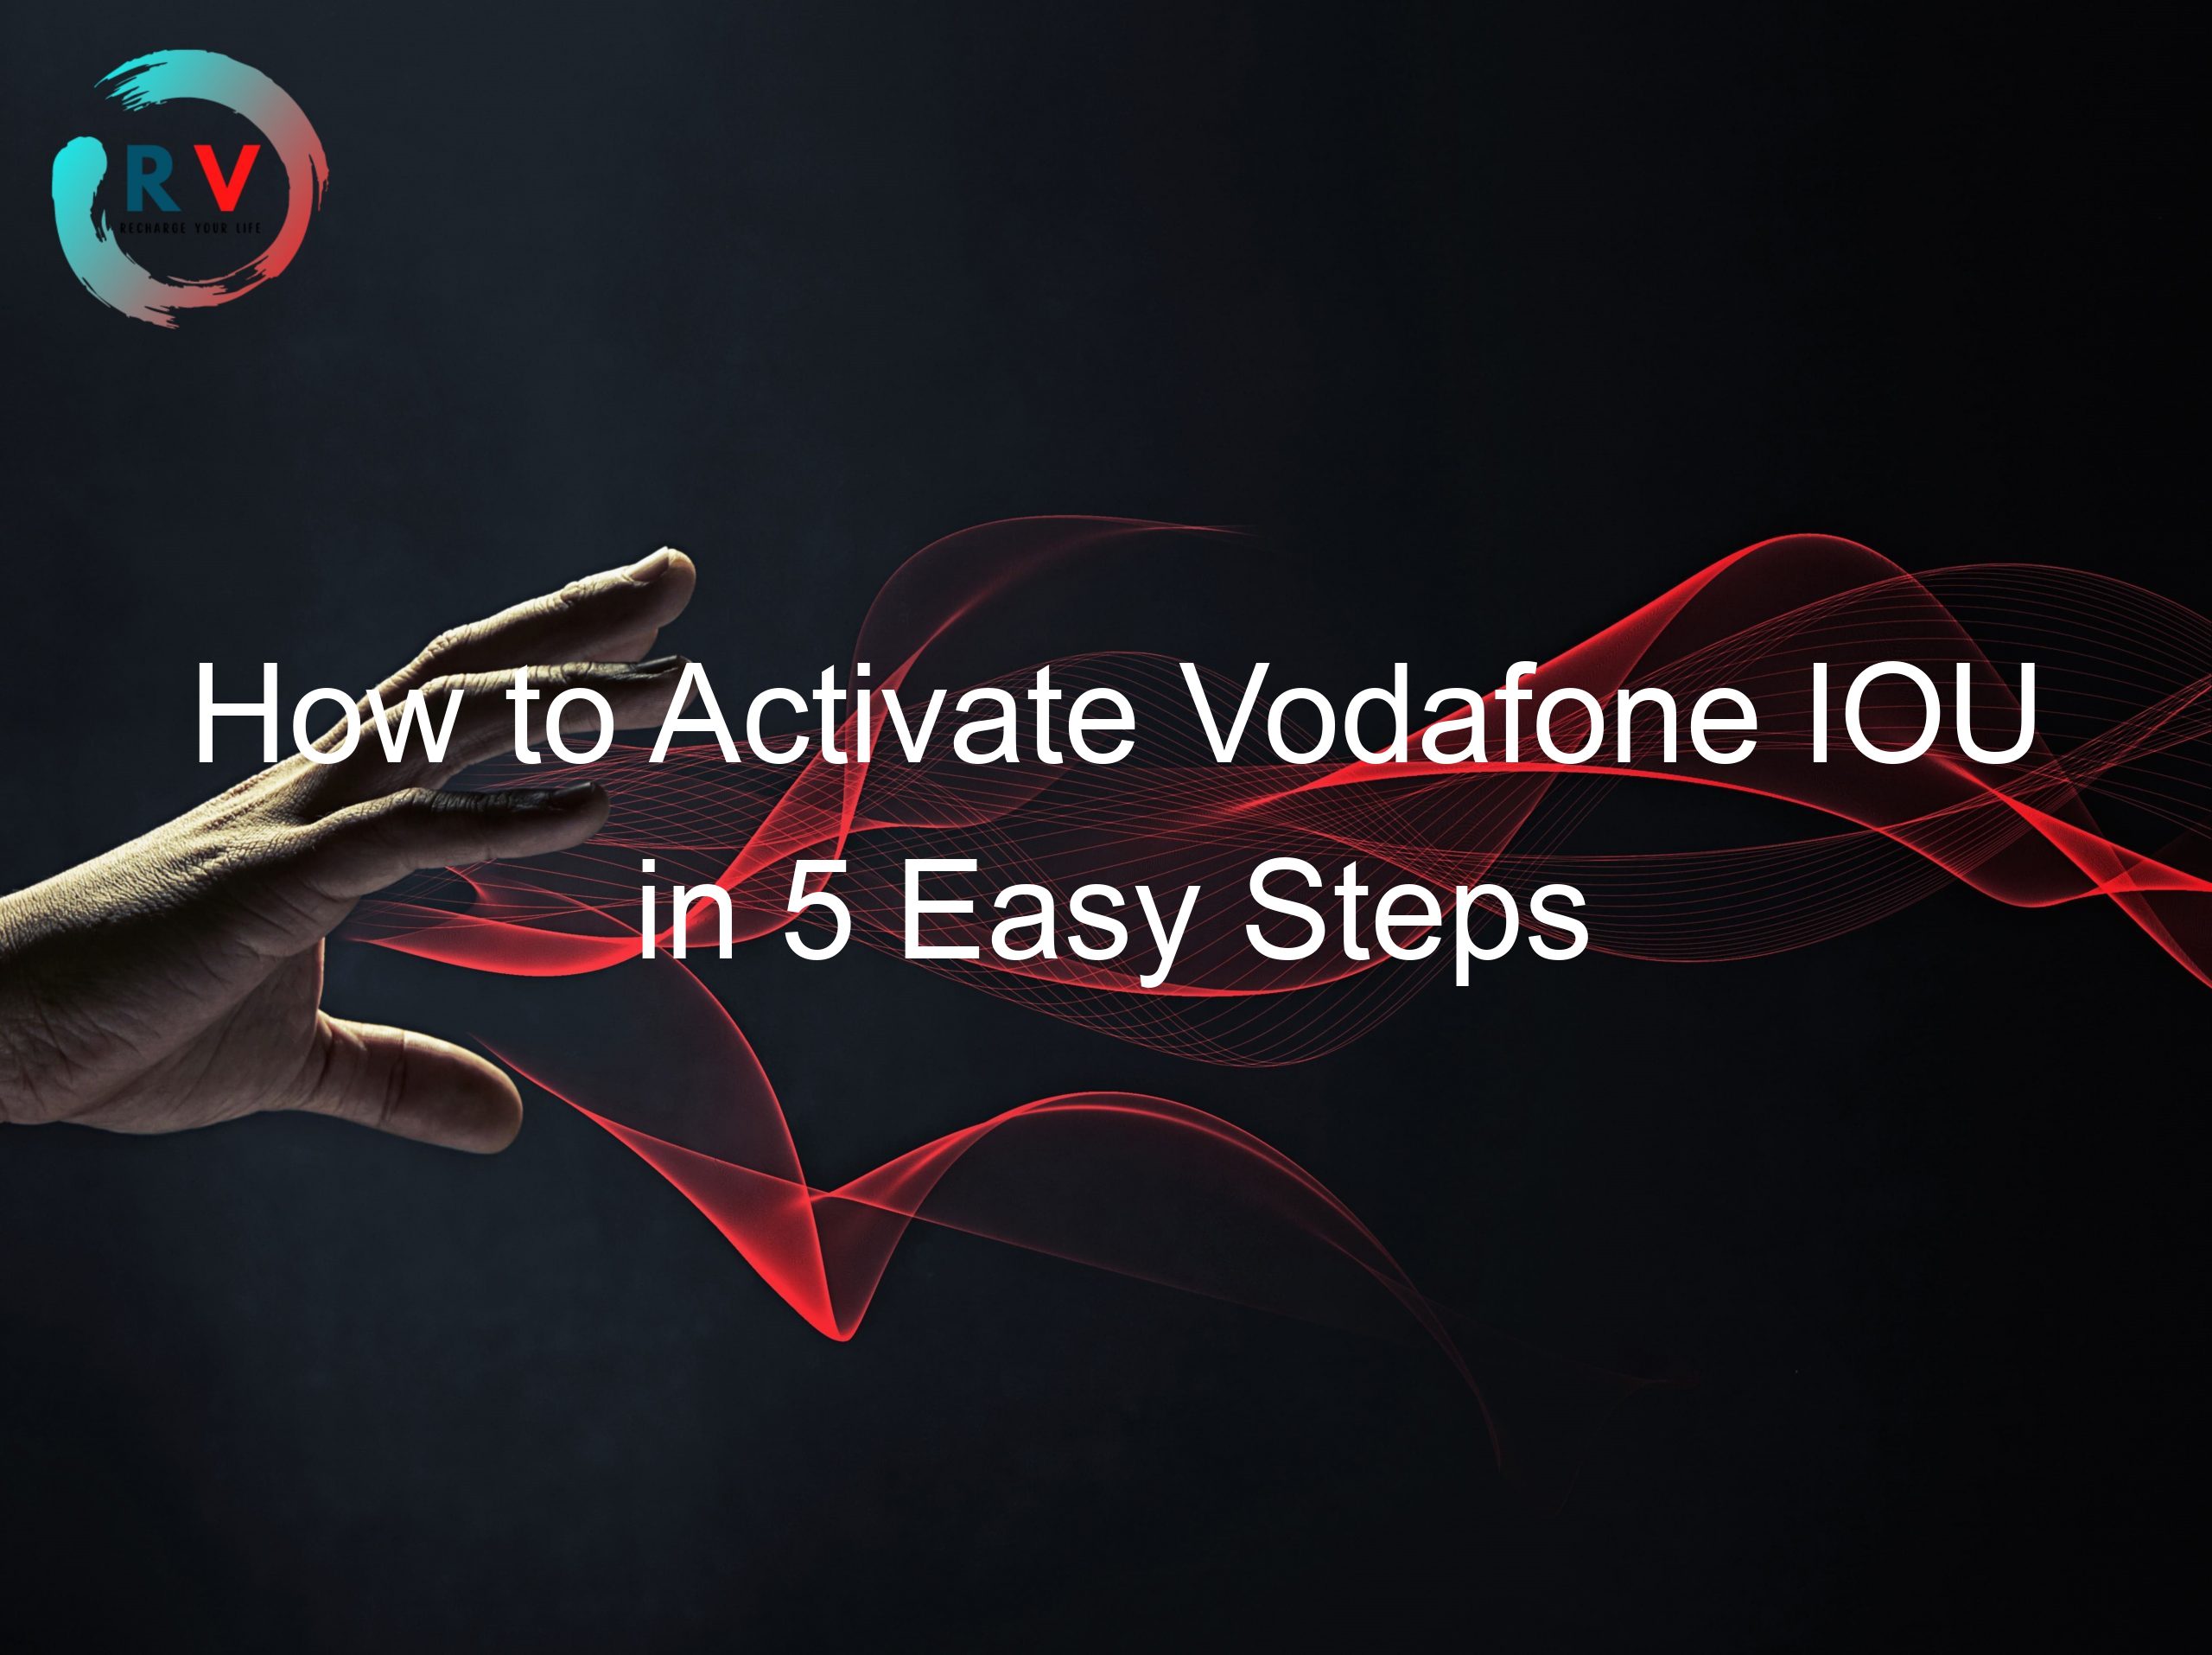 How to Activate Vodafone IOU in 5 Easy Steps